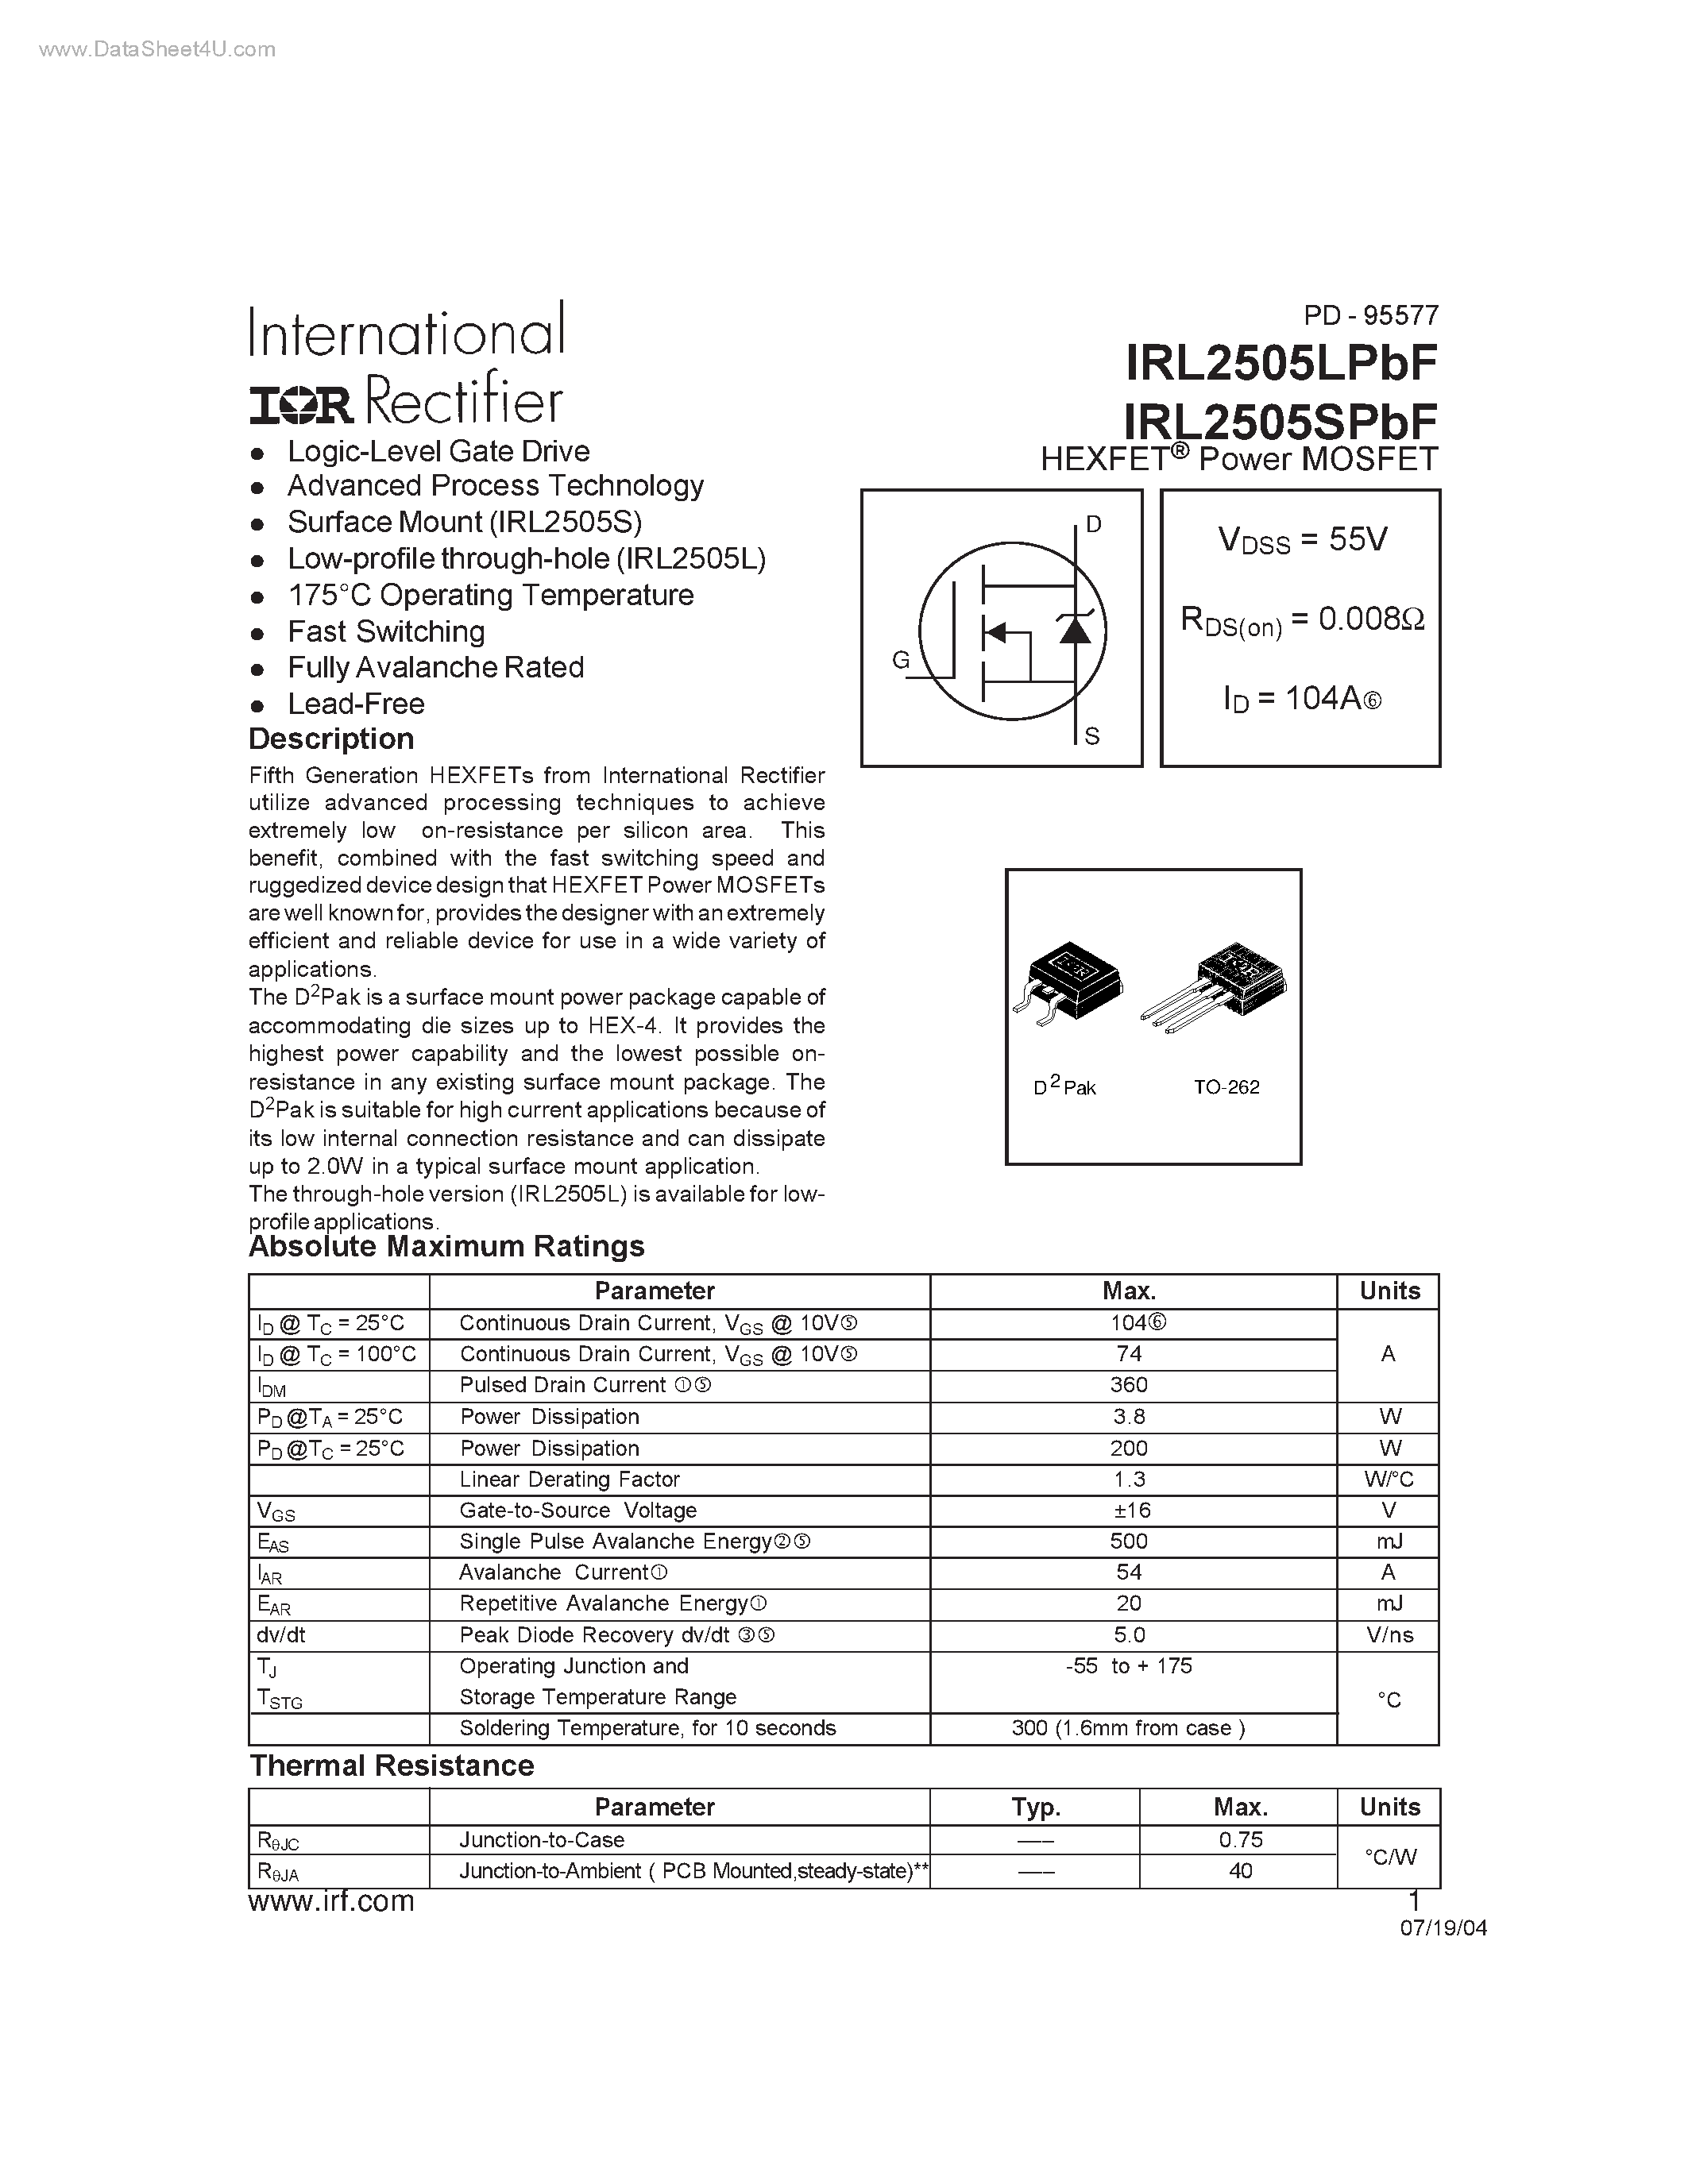 Datasheet IRL2505LPBF - HEXFET Power MOSFET page 1